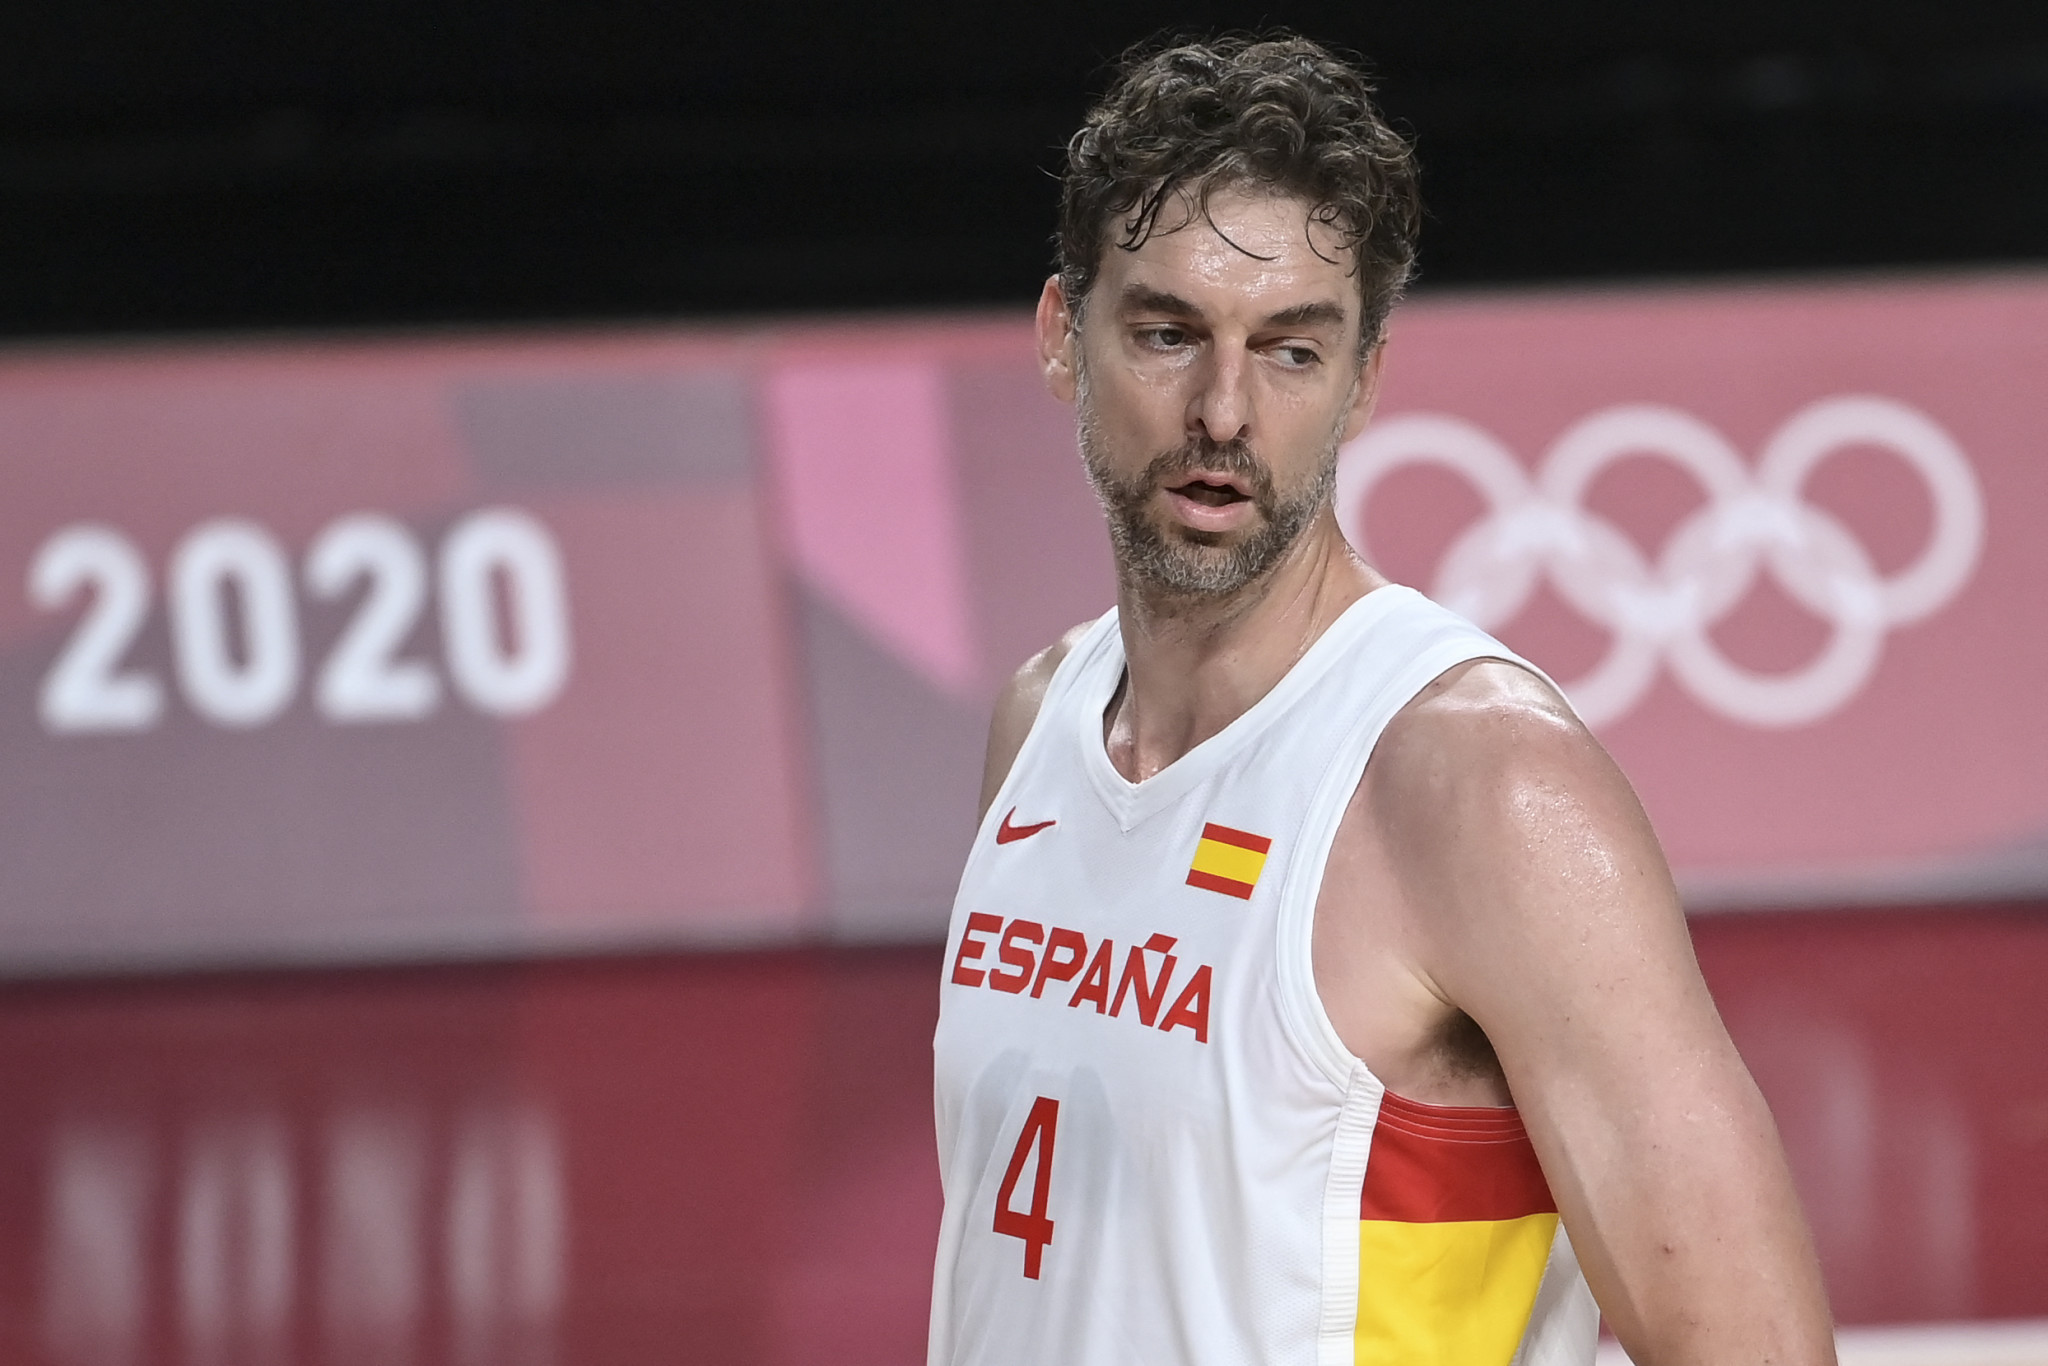 IOC member Pau Gasol of Spain was among the athletes to share his advice on sleeping routines ©Getty Images